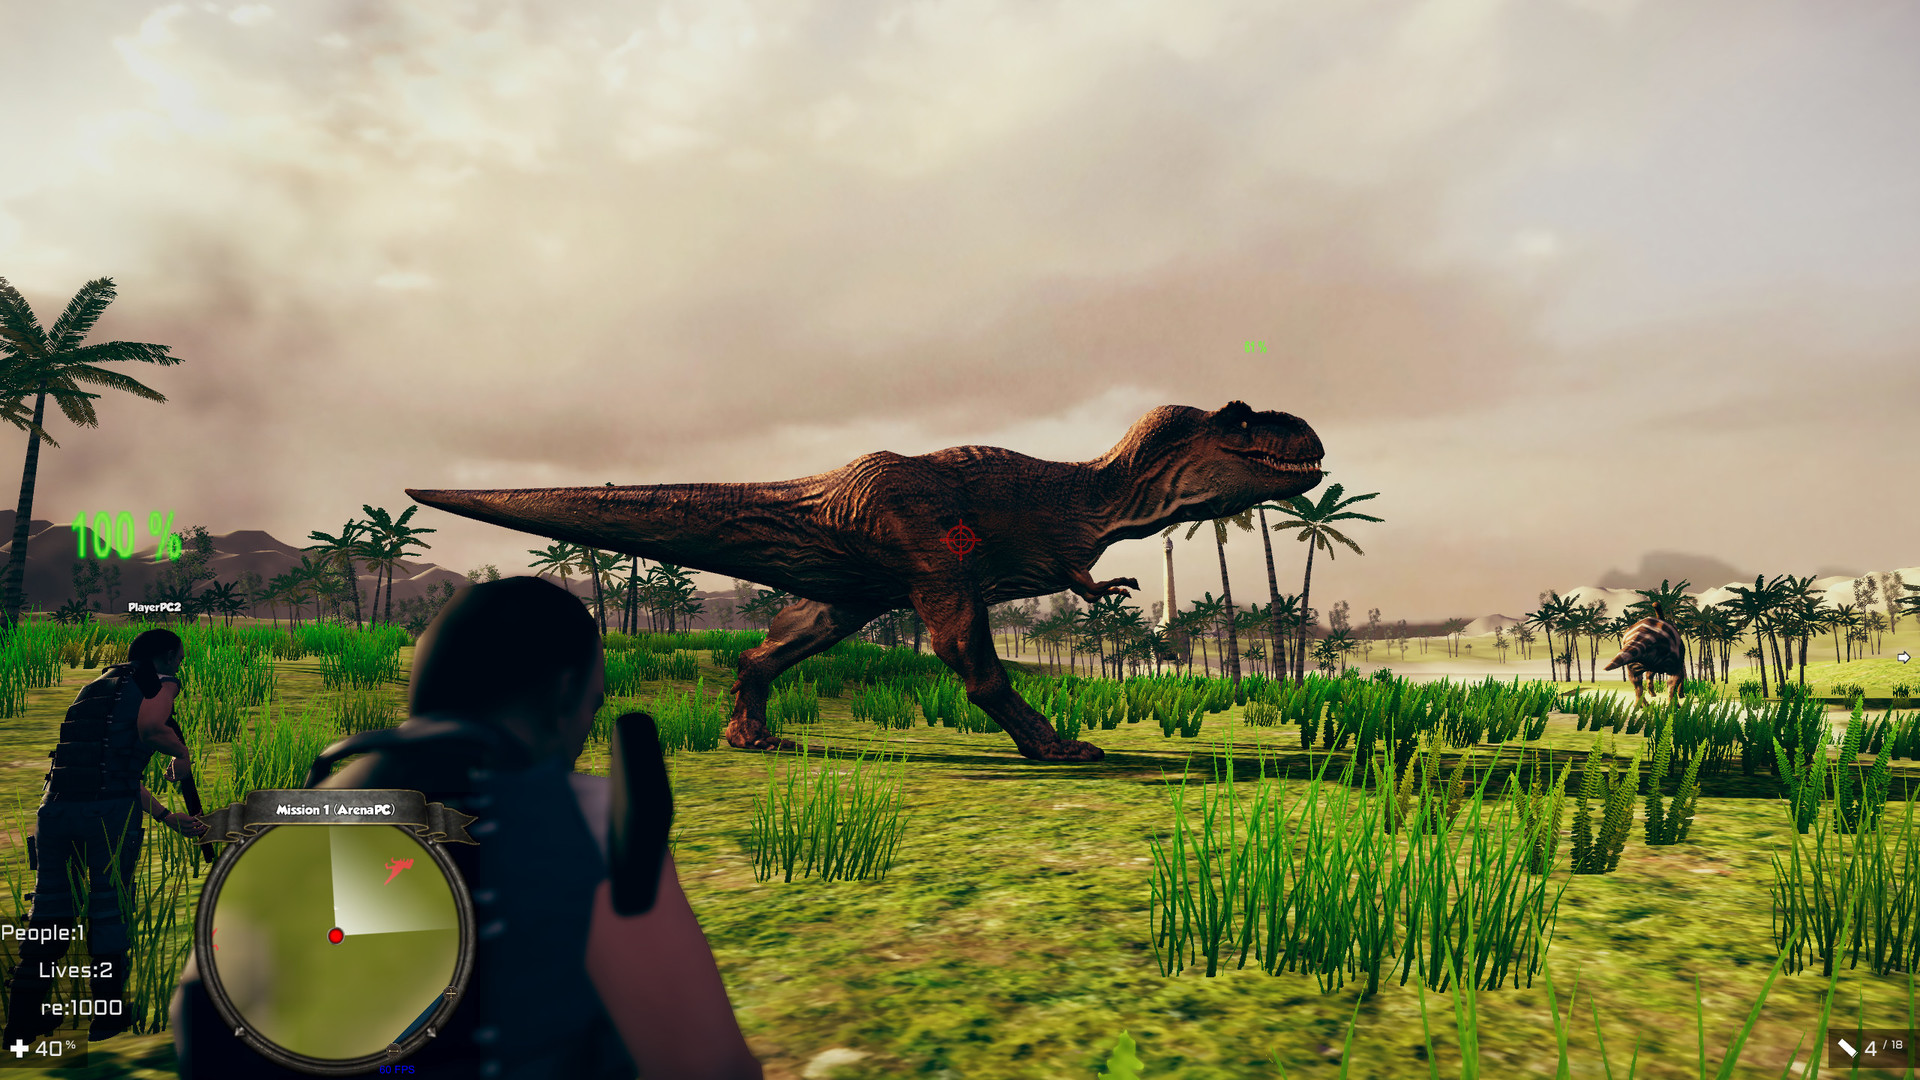 dinosaur hunting games free download for pc